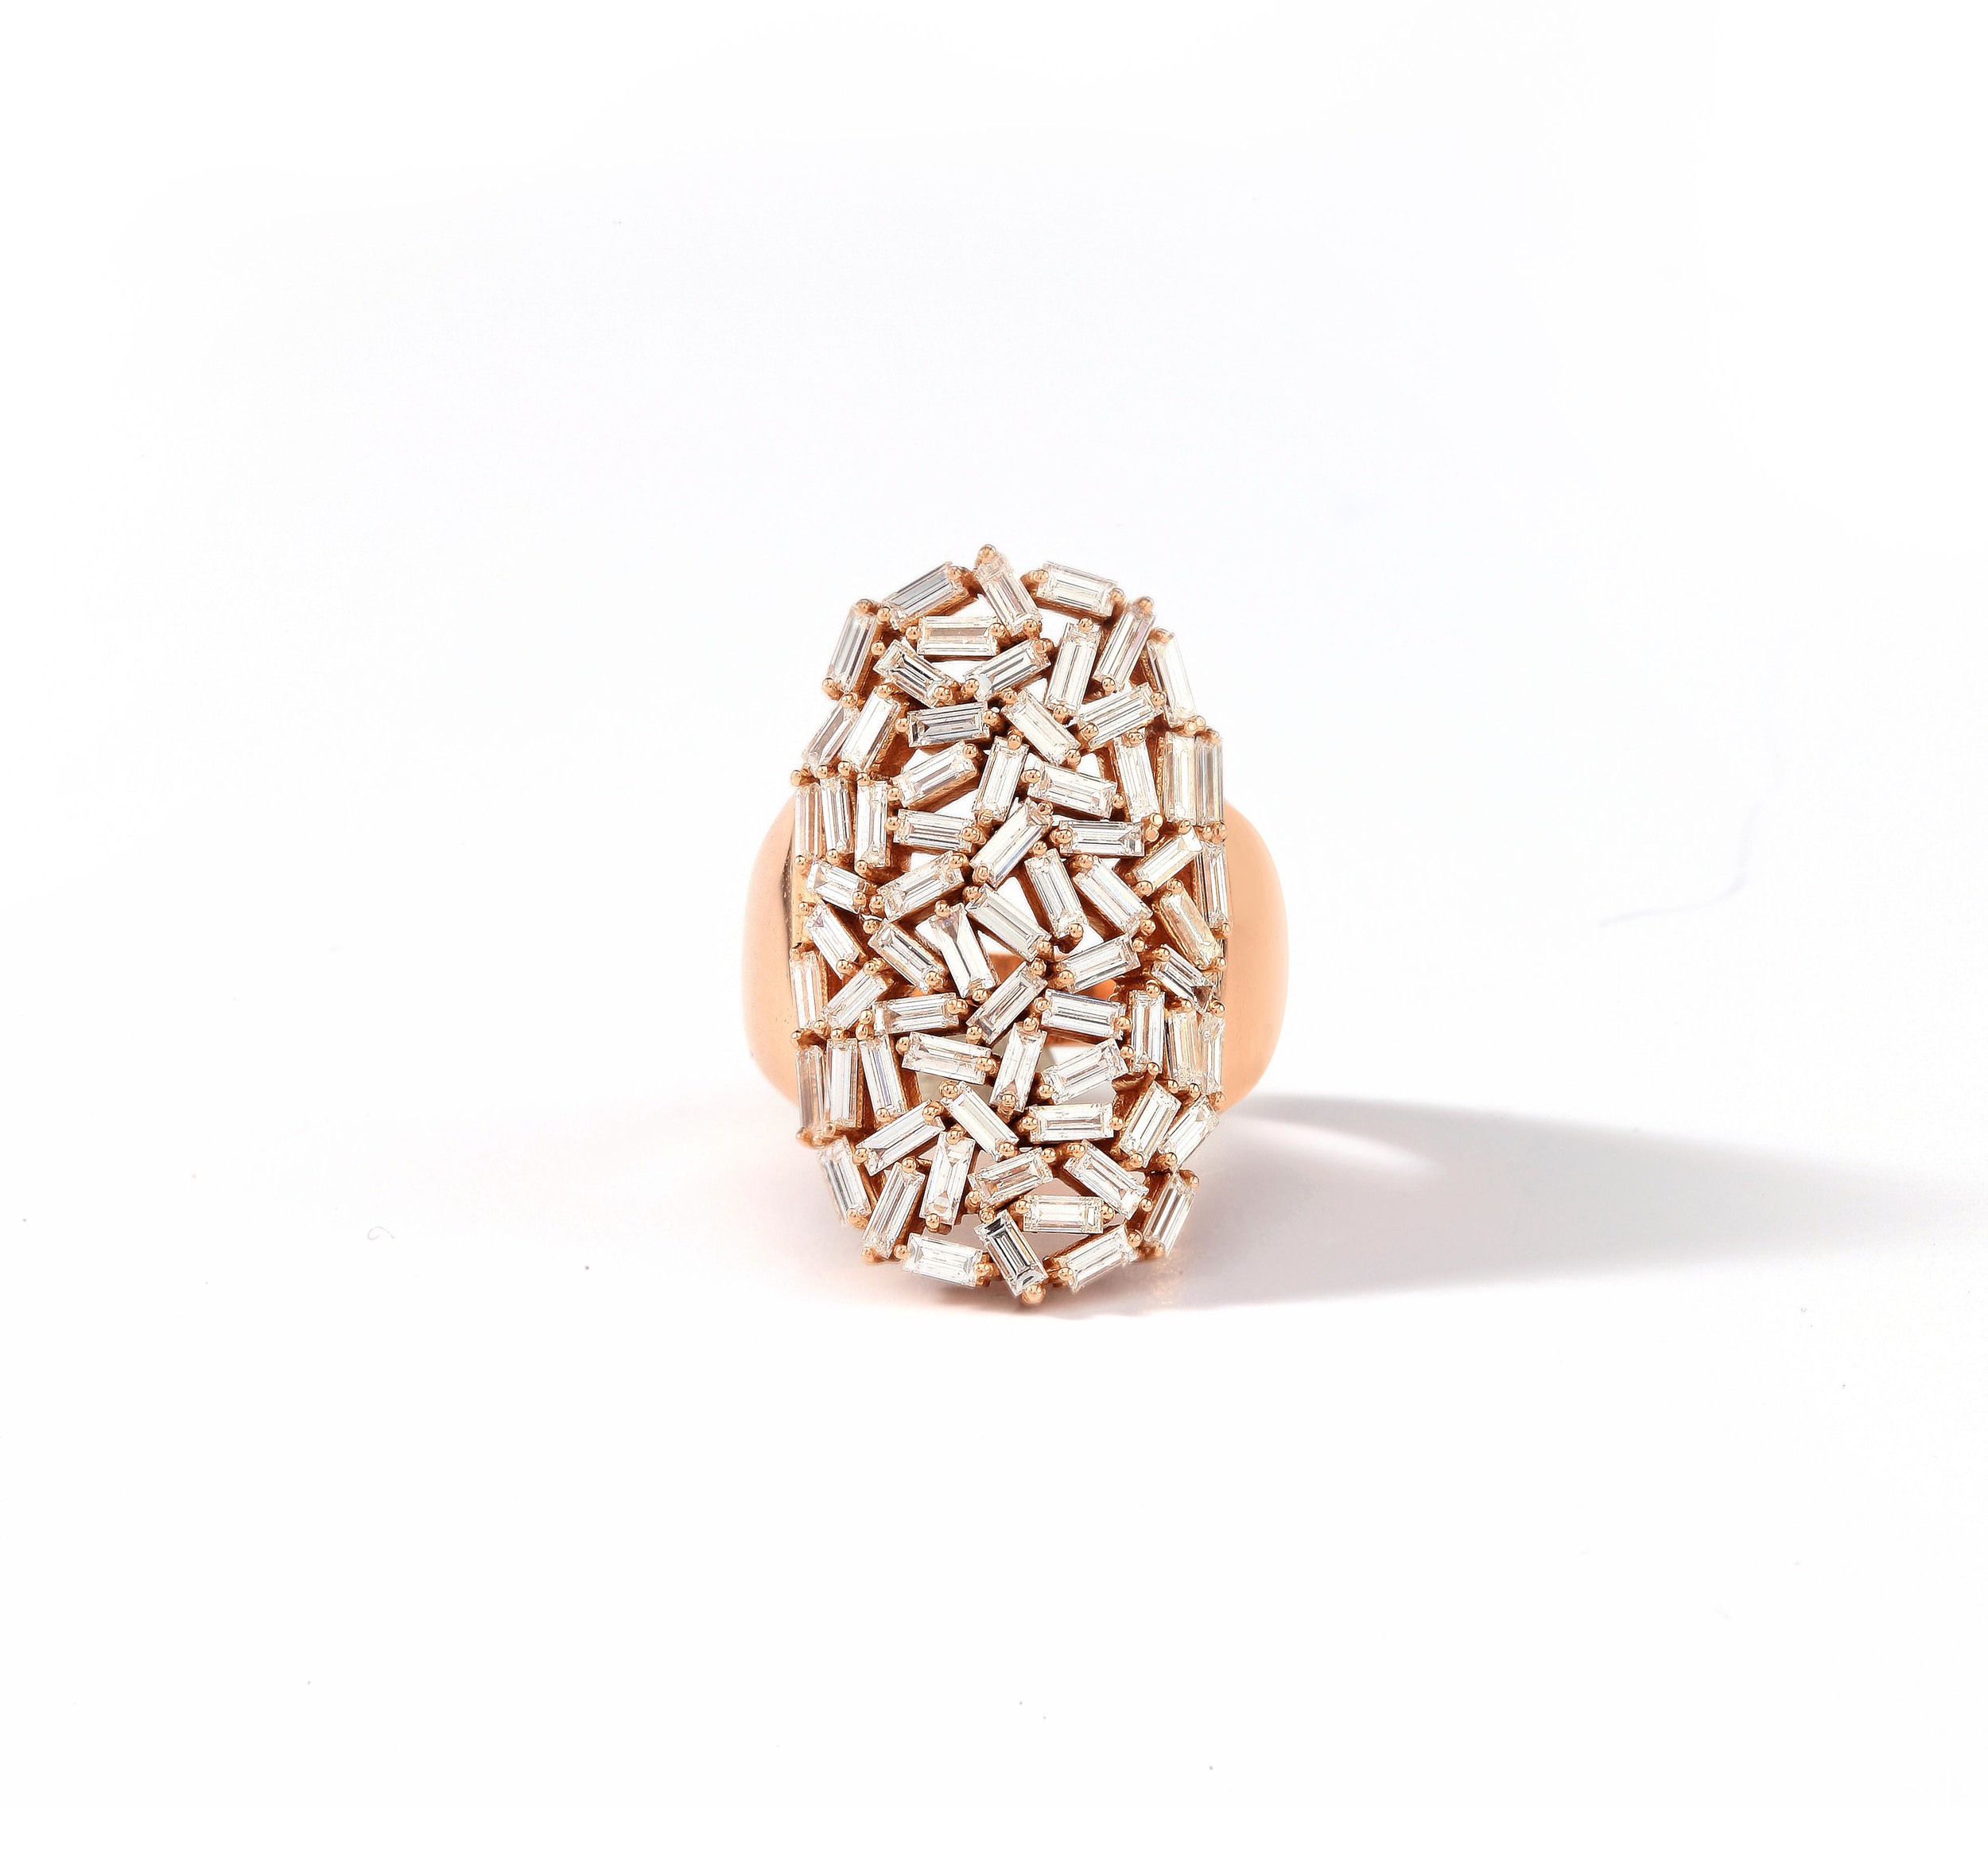  The 18k gold Fireworks Baguette Diamond Shield Ring that won the ‘Diamonds Below $20,000 (retail)’ Couture Design category in 2014.&nbsp; 